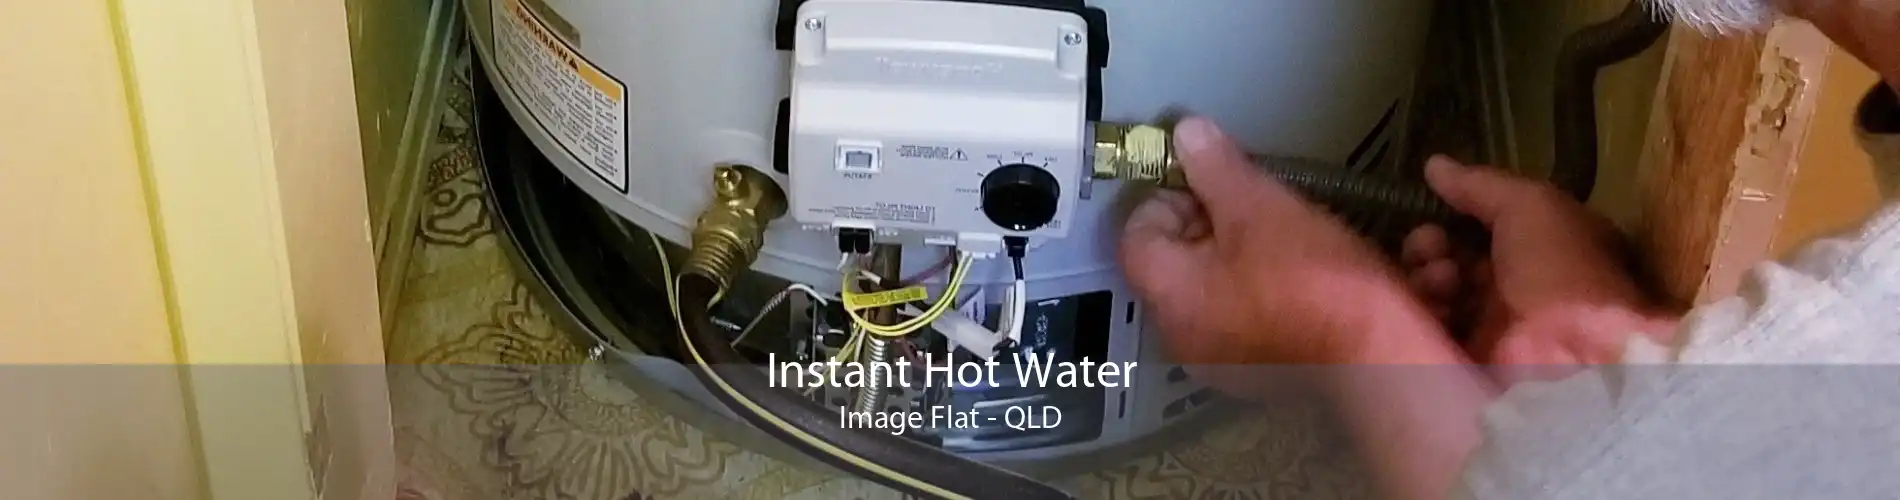 Instant Hot Water Image Flat - QLD